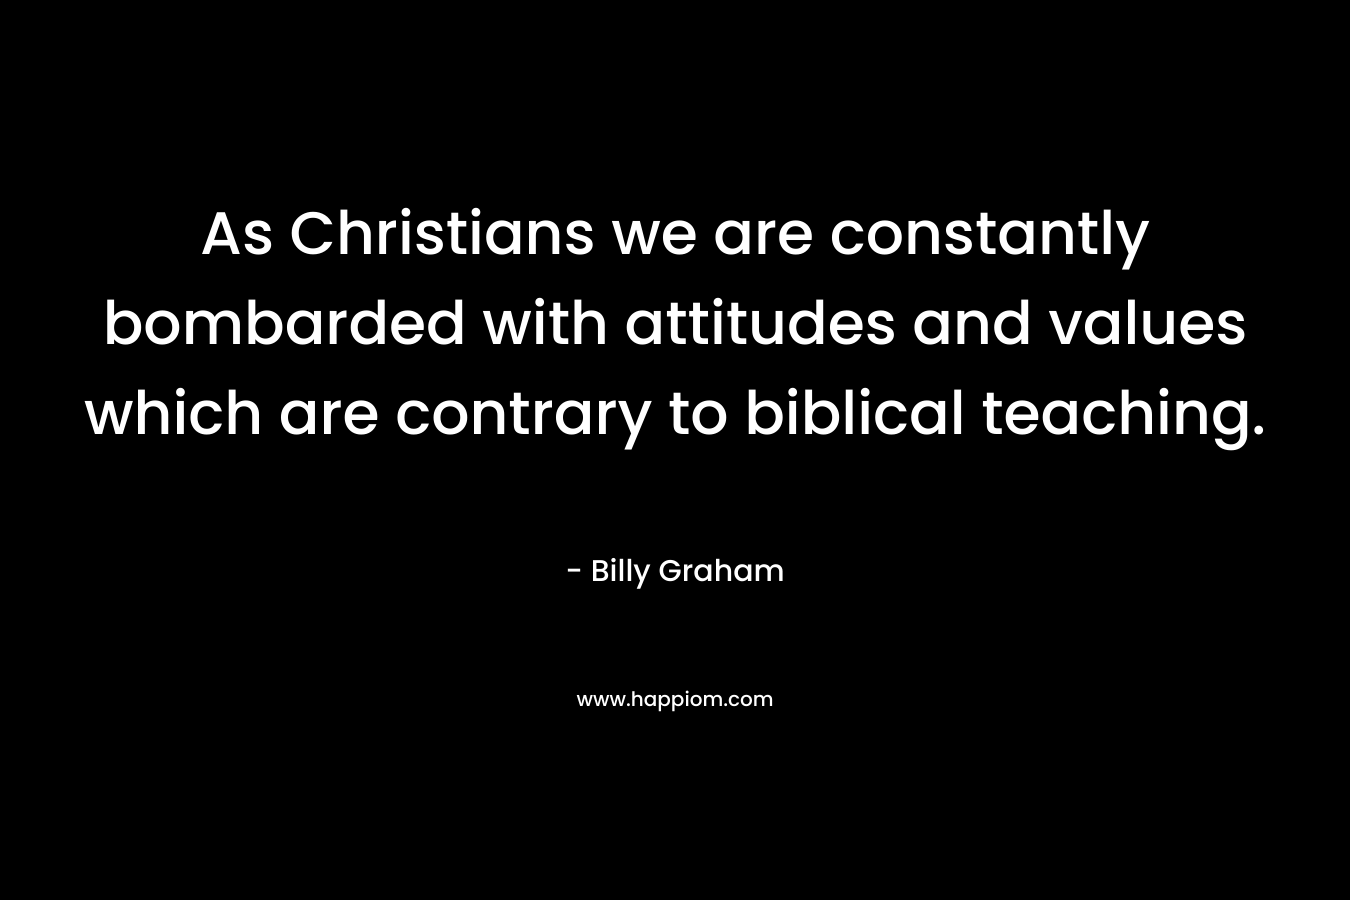 As Christians we are constantly bombarded with attitudes and values which are contrary to biblical teaching.